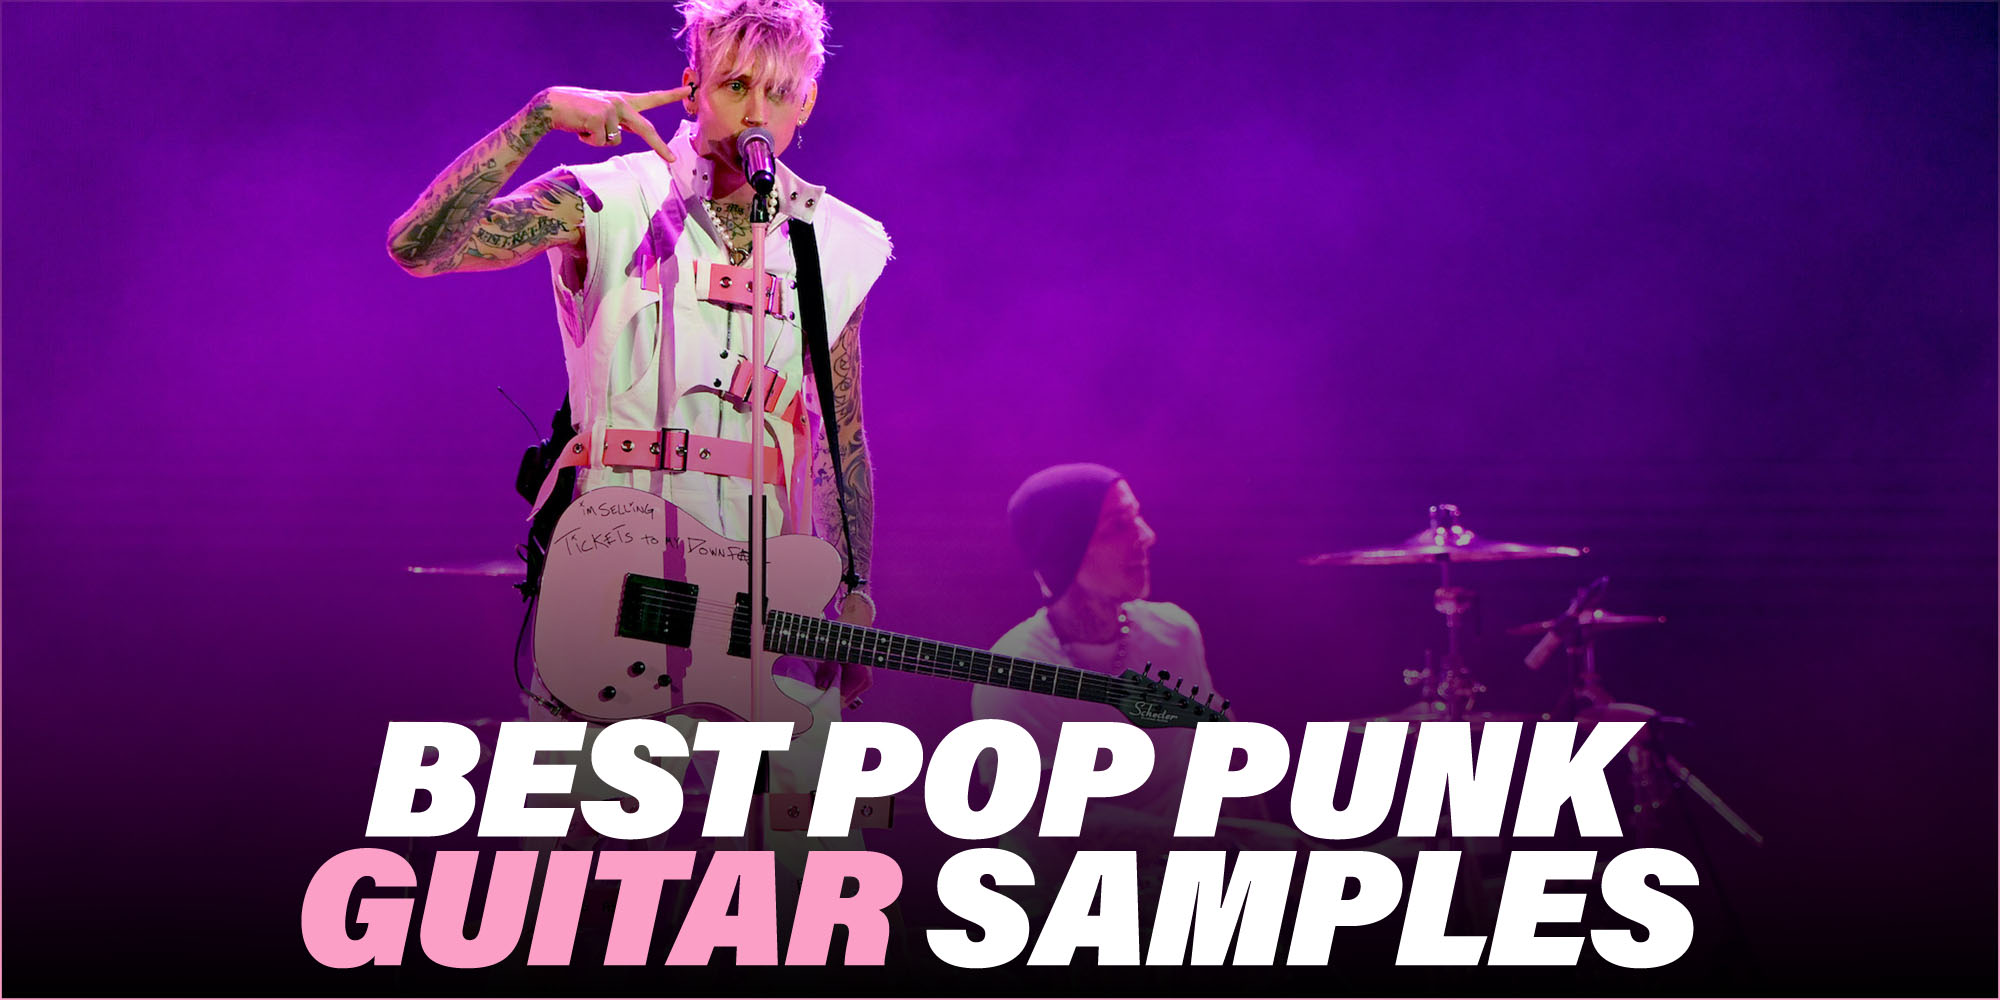 The best pop punk guitar samples and loops